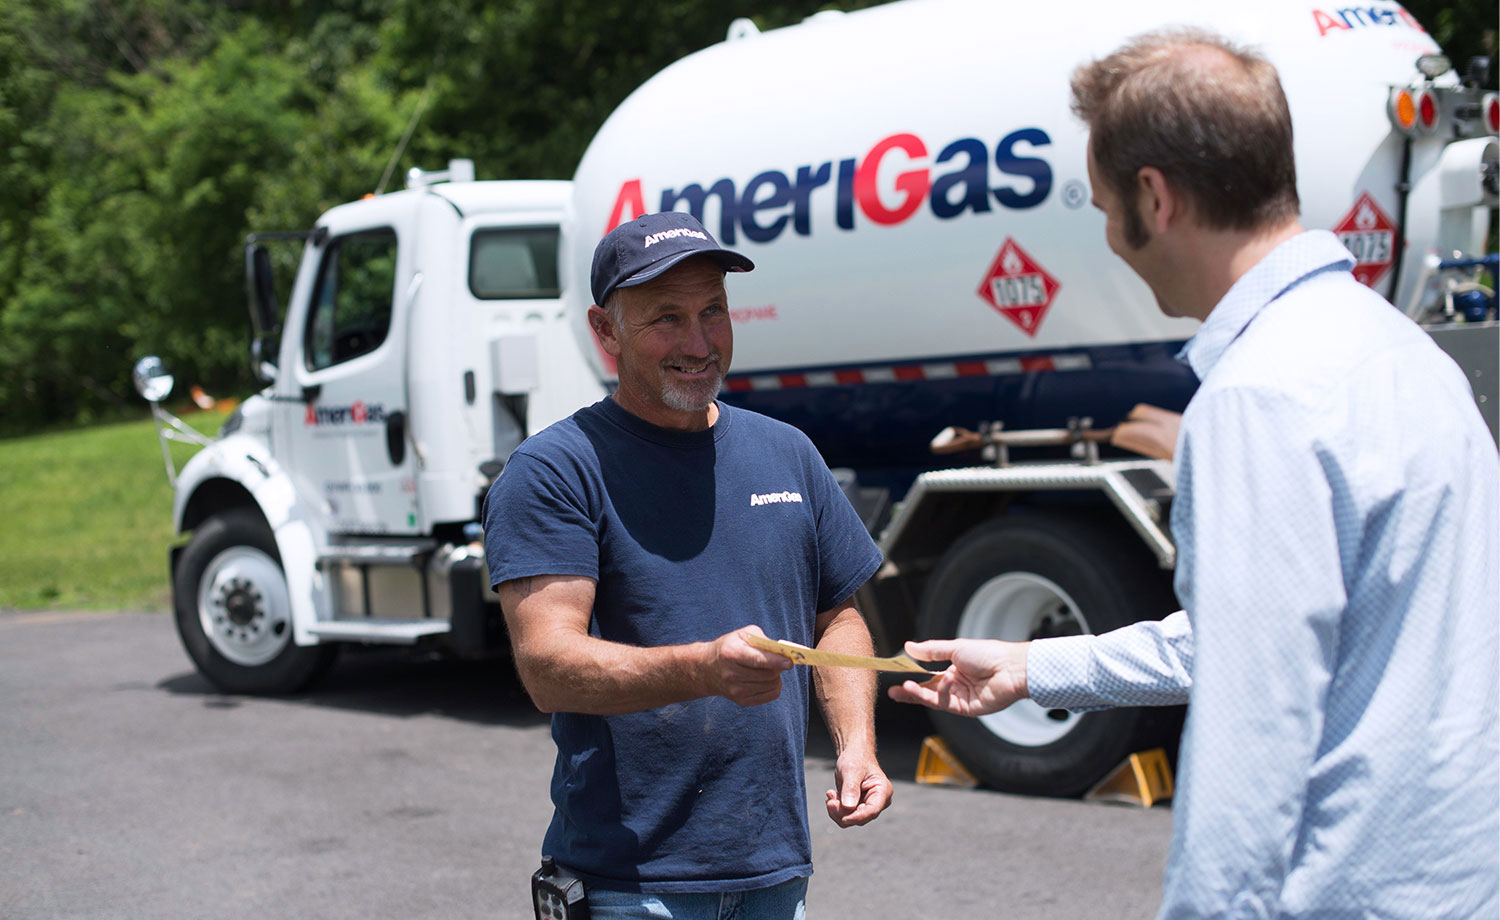 Two men standing in front of an AmeriGas truck.